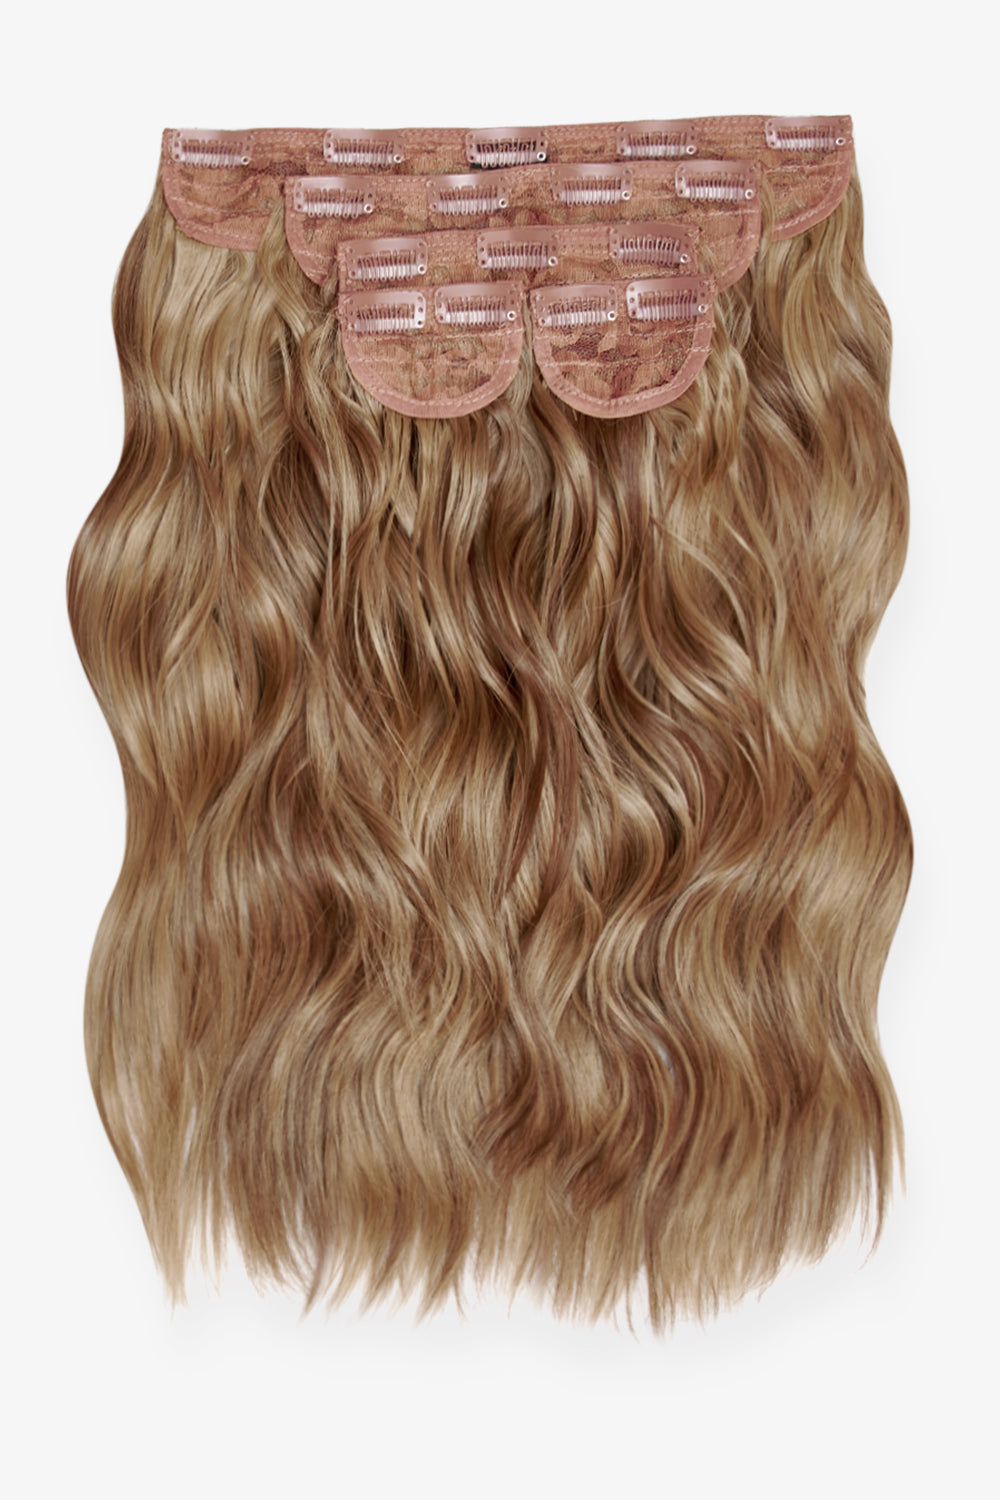 Super Thick 16’’ 5 Piece Brushed Out Wave Clip In Hair Extensions + Hair Care Bundle - Mellow Brown